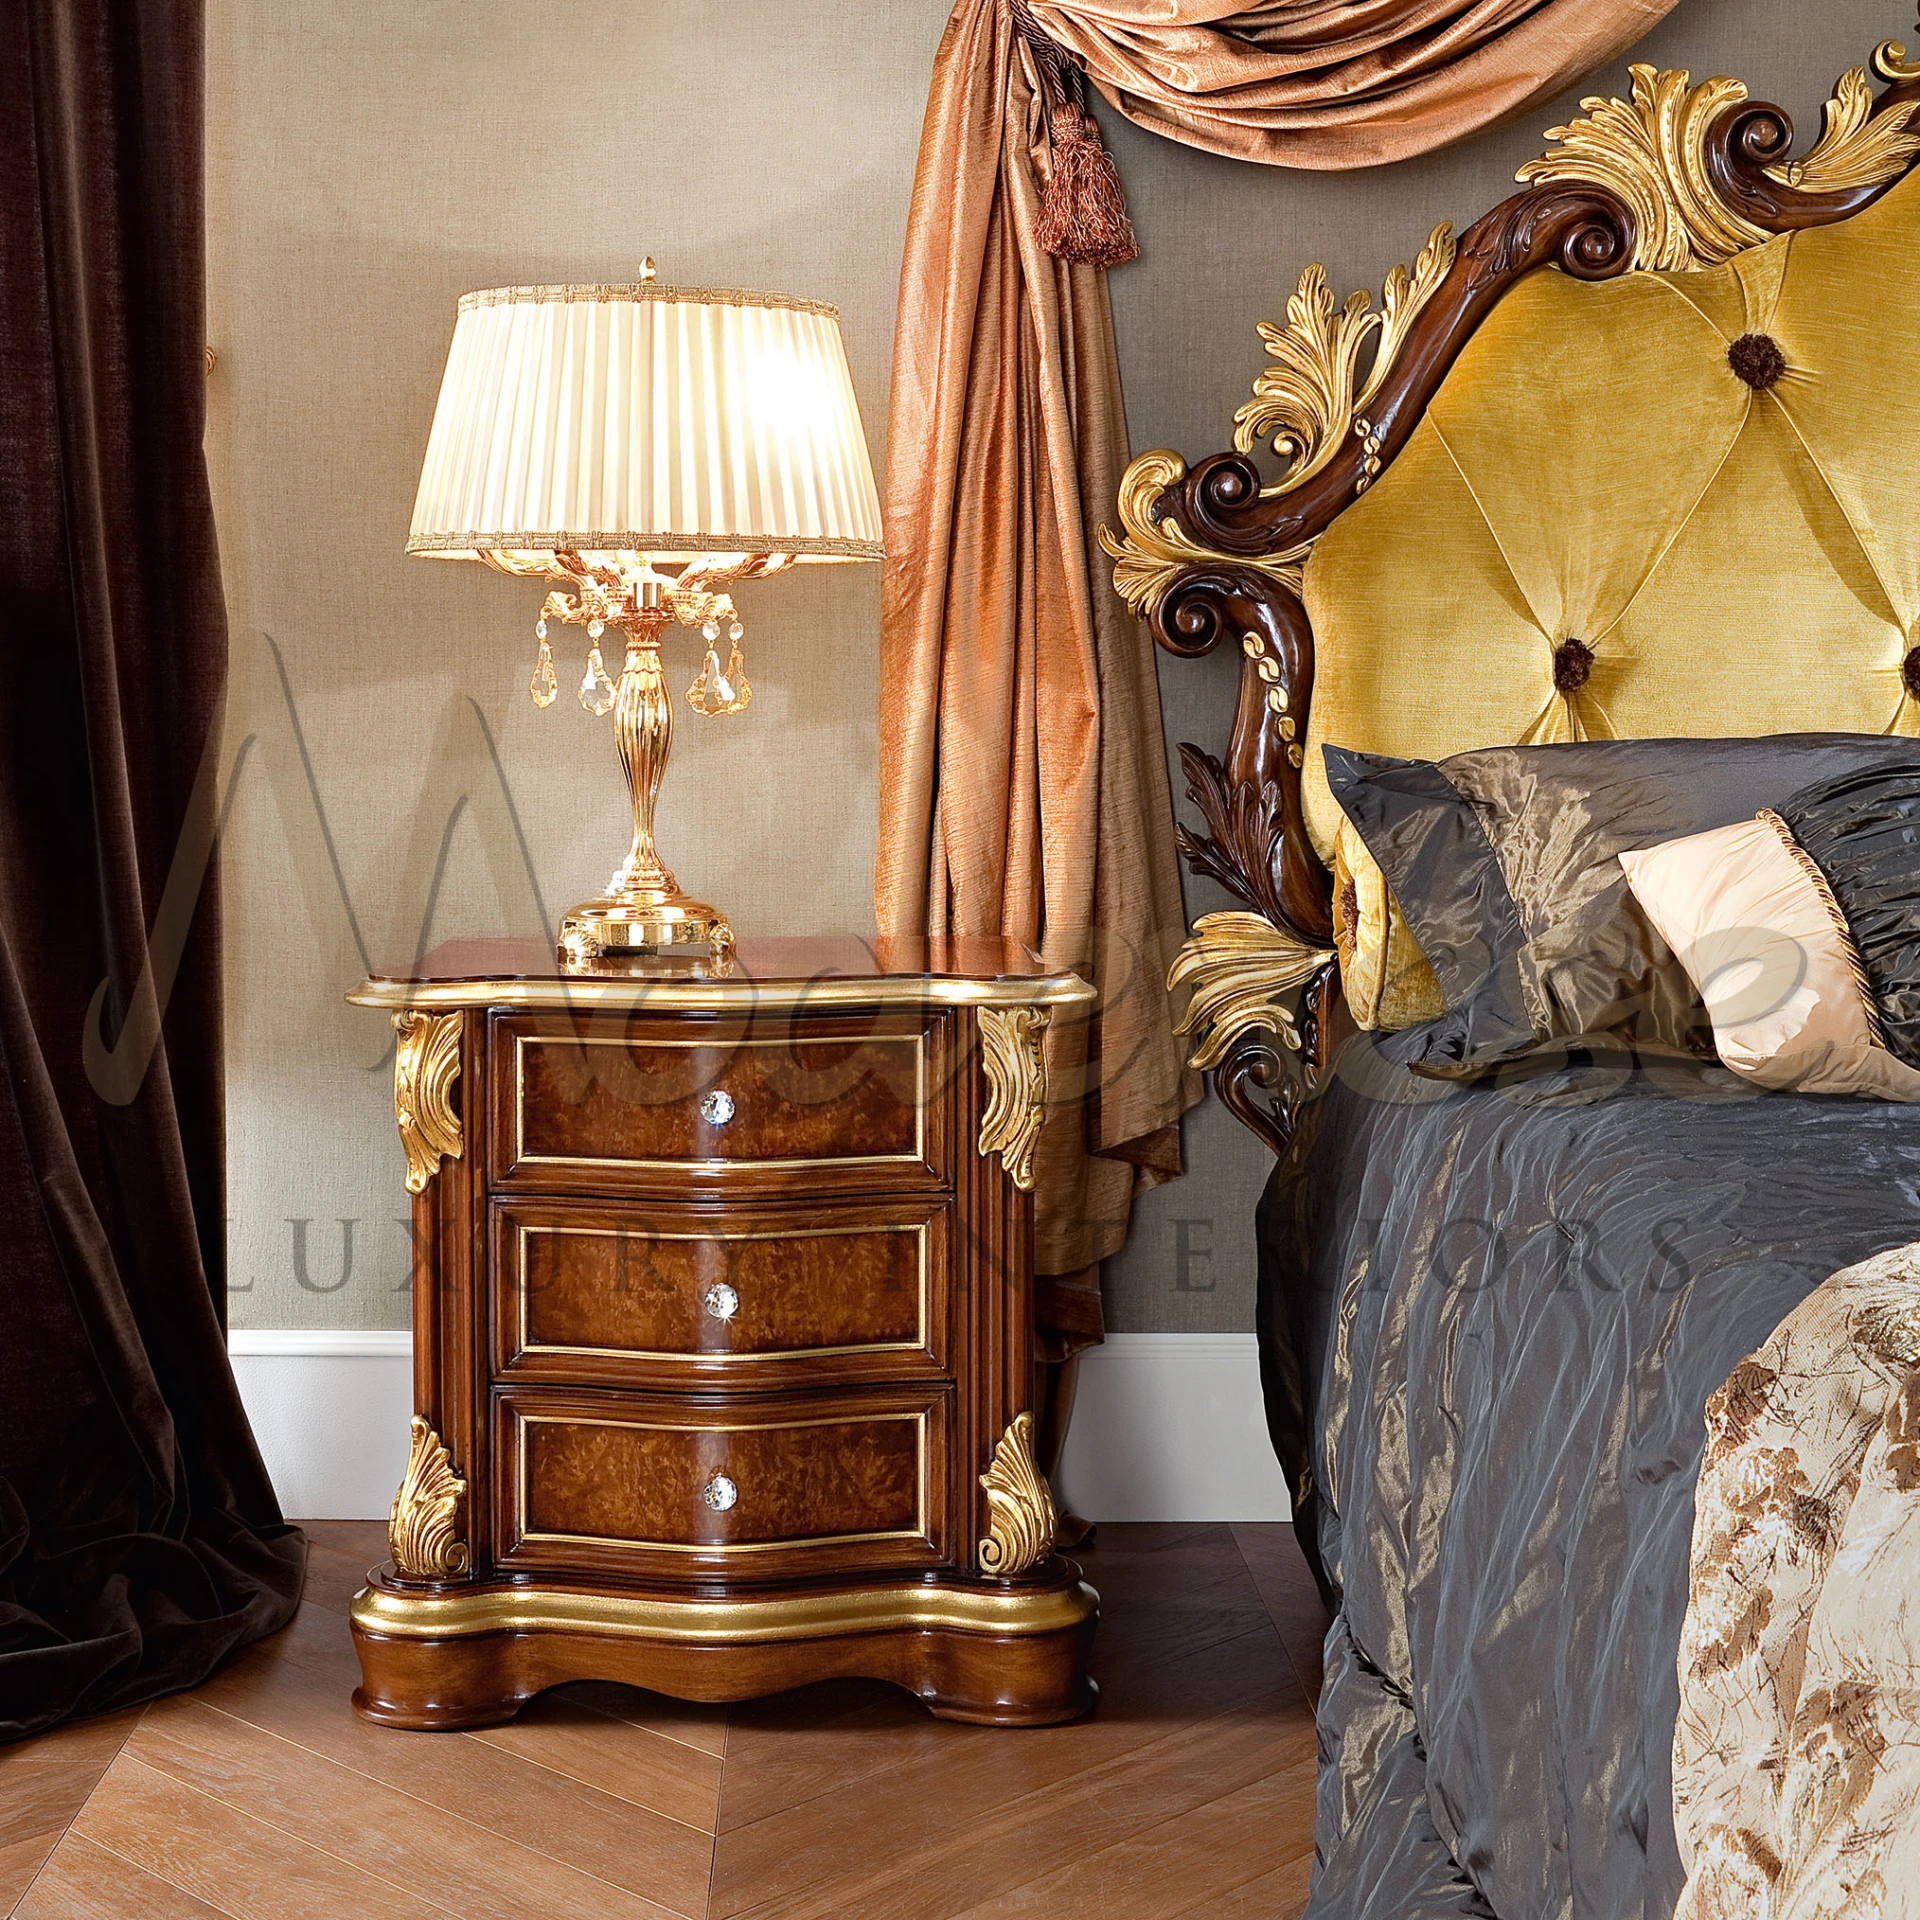 Classic bedroom interior with a burl wood nightstand, ornate gold detailing, and a crystal table lamp, next to an opulent bed with a golden upholstered headboard and luxurious drapery.